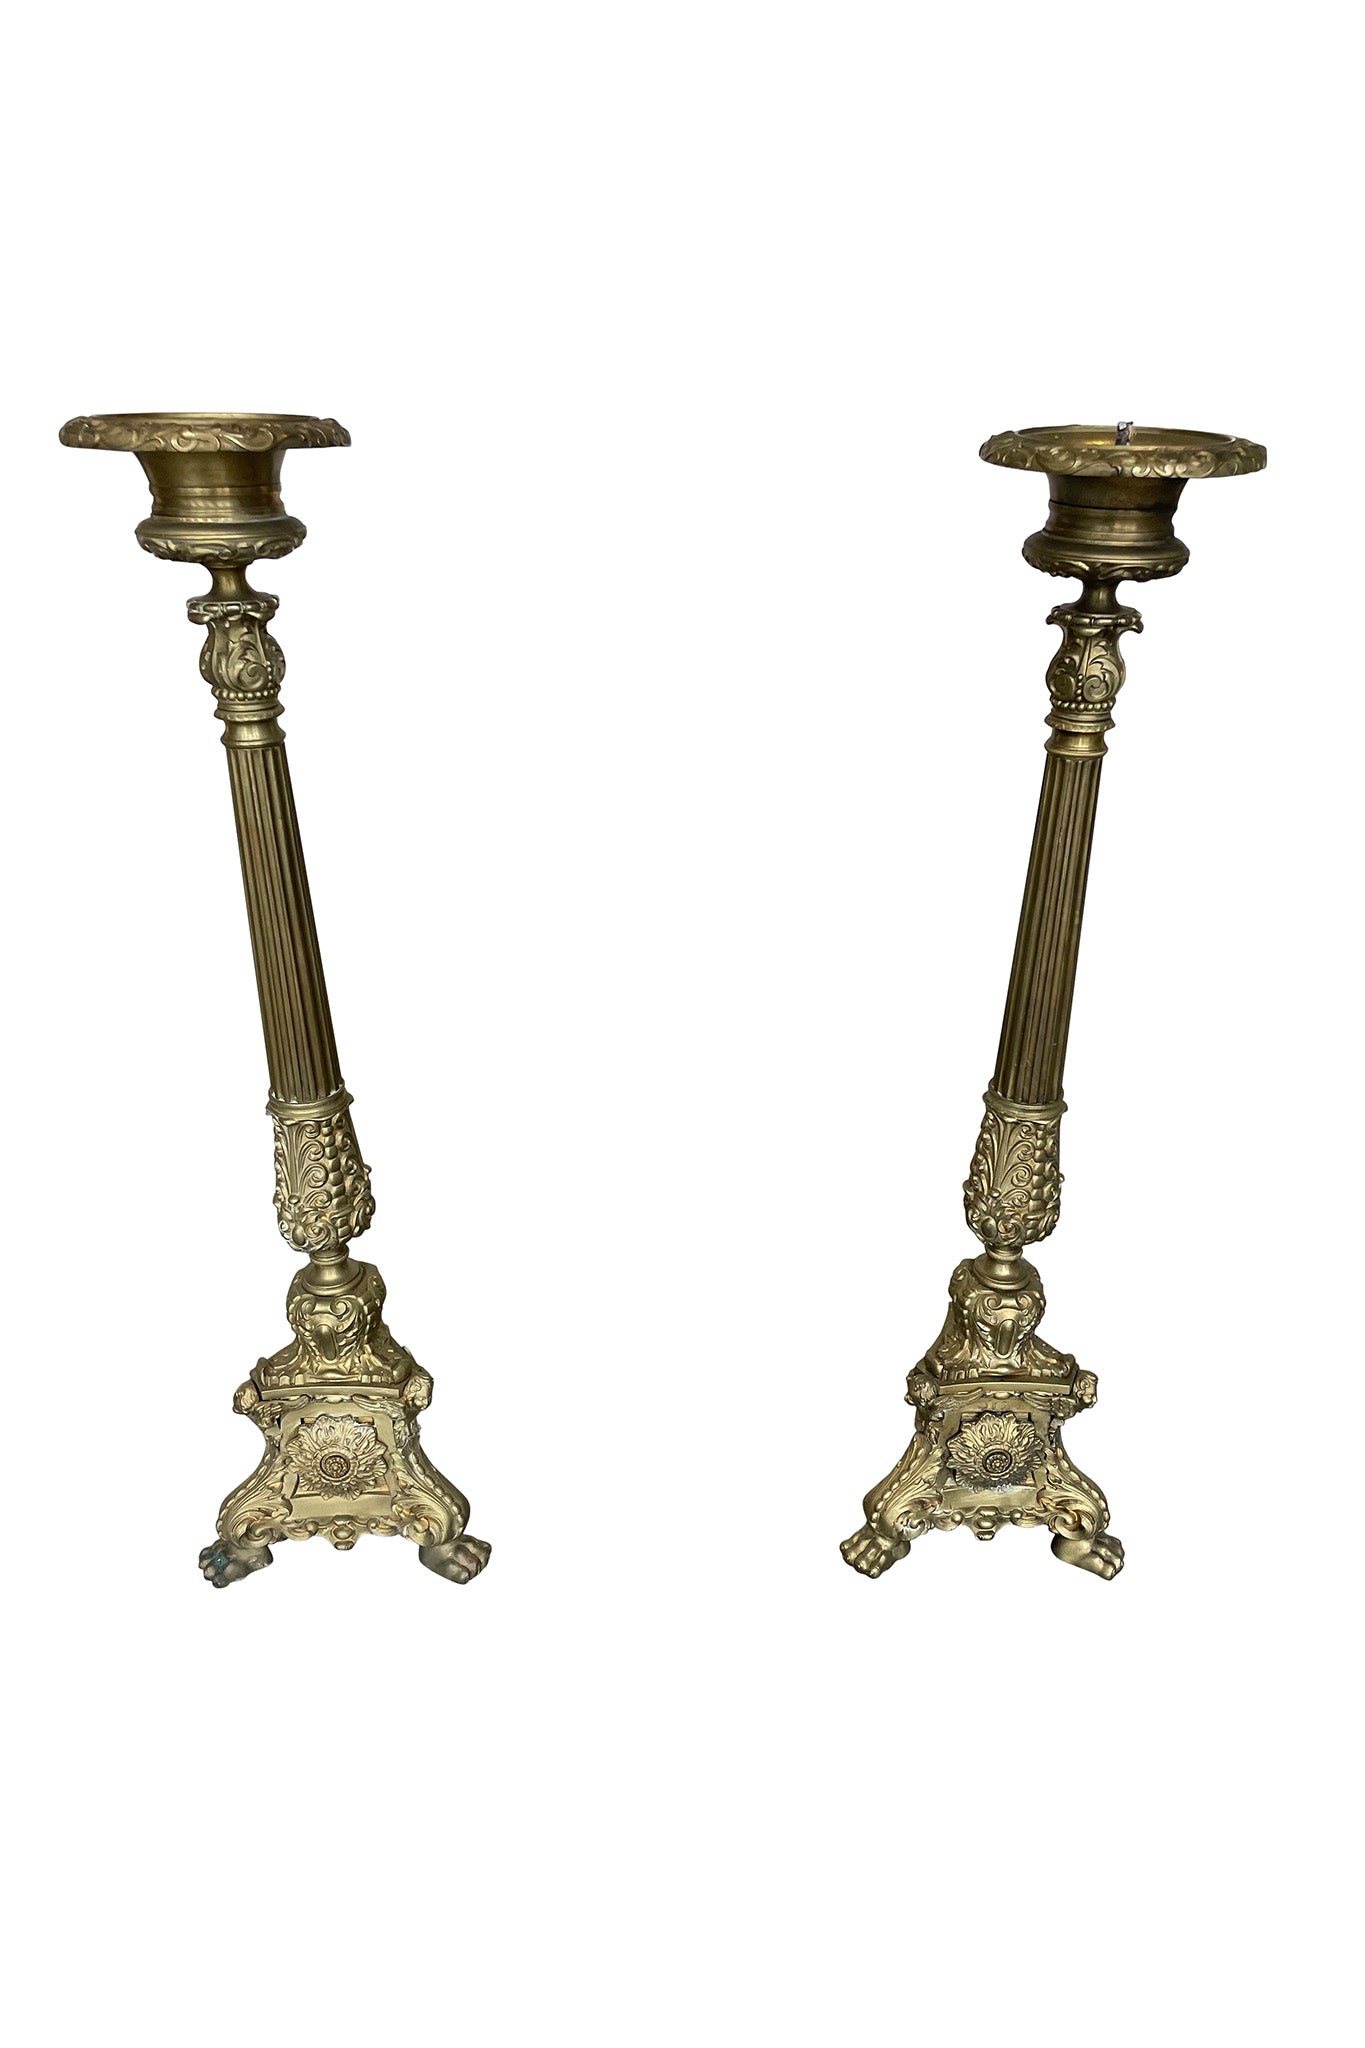 Incredible Vintage Brass Candlestick